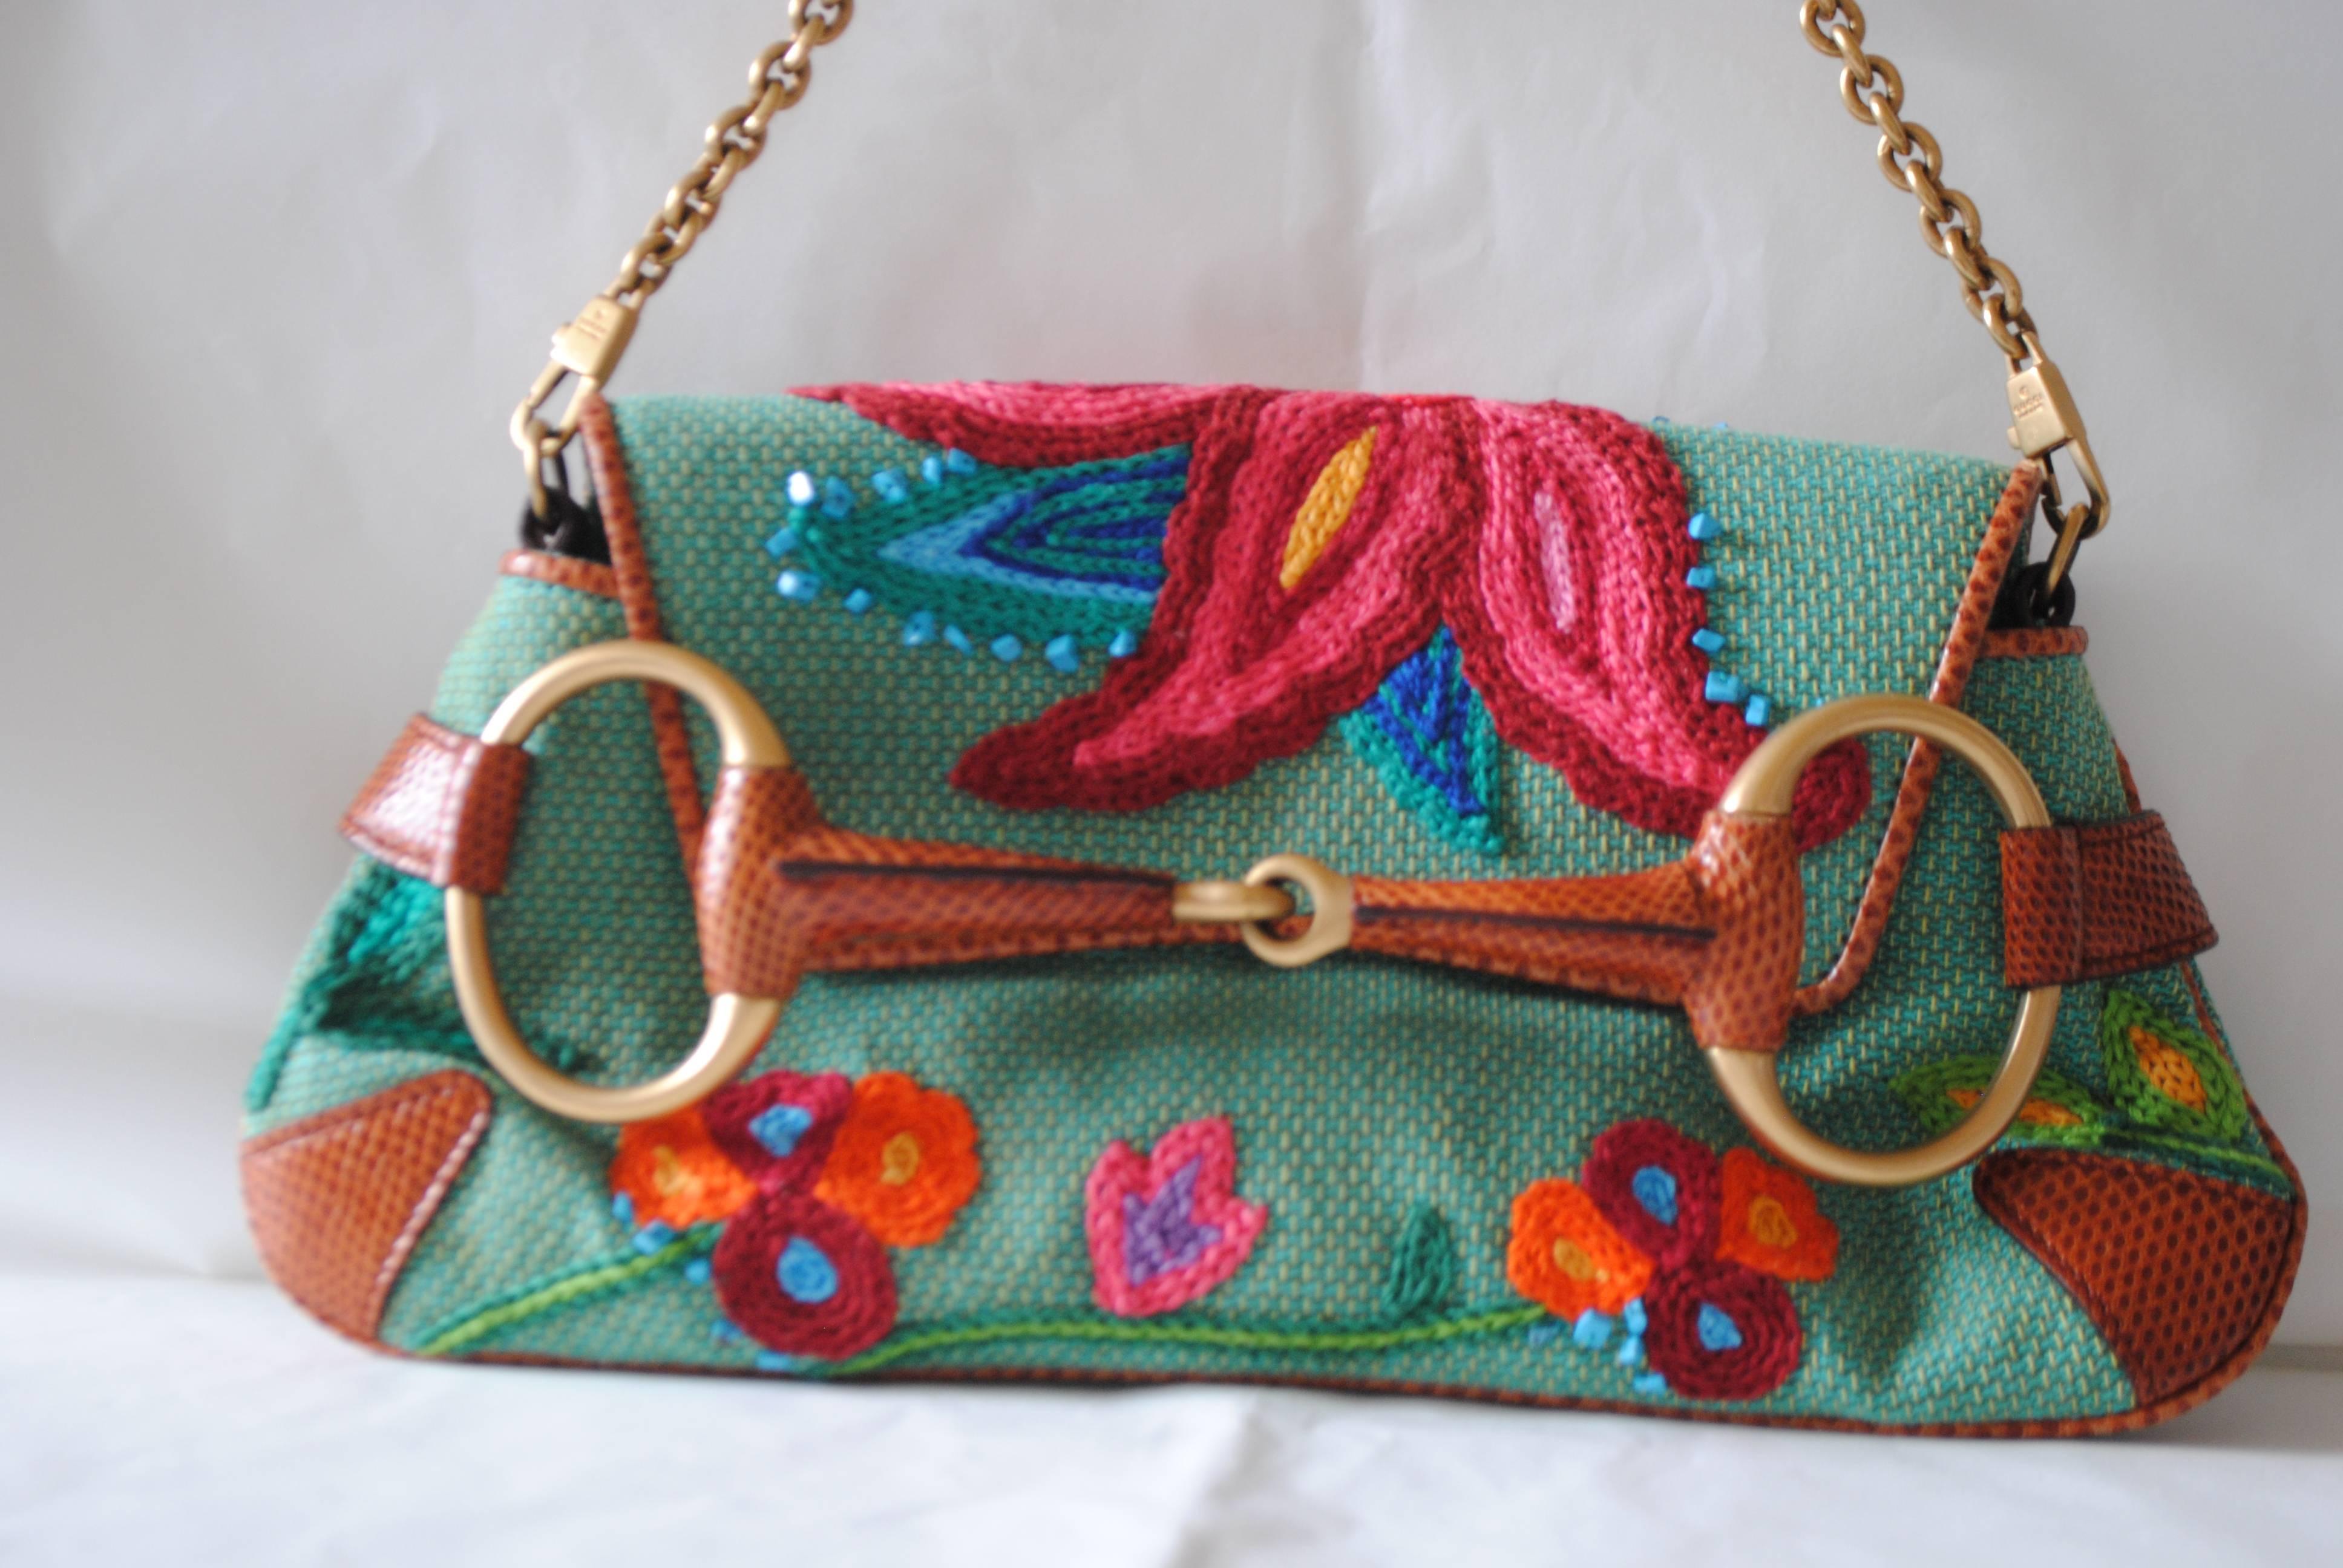 Gucci by Tom Ford Embroided horsebit bag
Green textile bag embroided with multicoloured flowers rounded by light blue beads
gold tone horsebit chain   
embellished with lizard brown skin
Gold tone removable shoulder chain
Shoulder chain lenght: 42